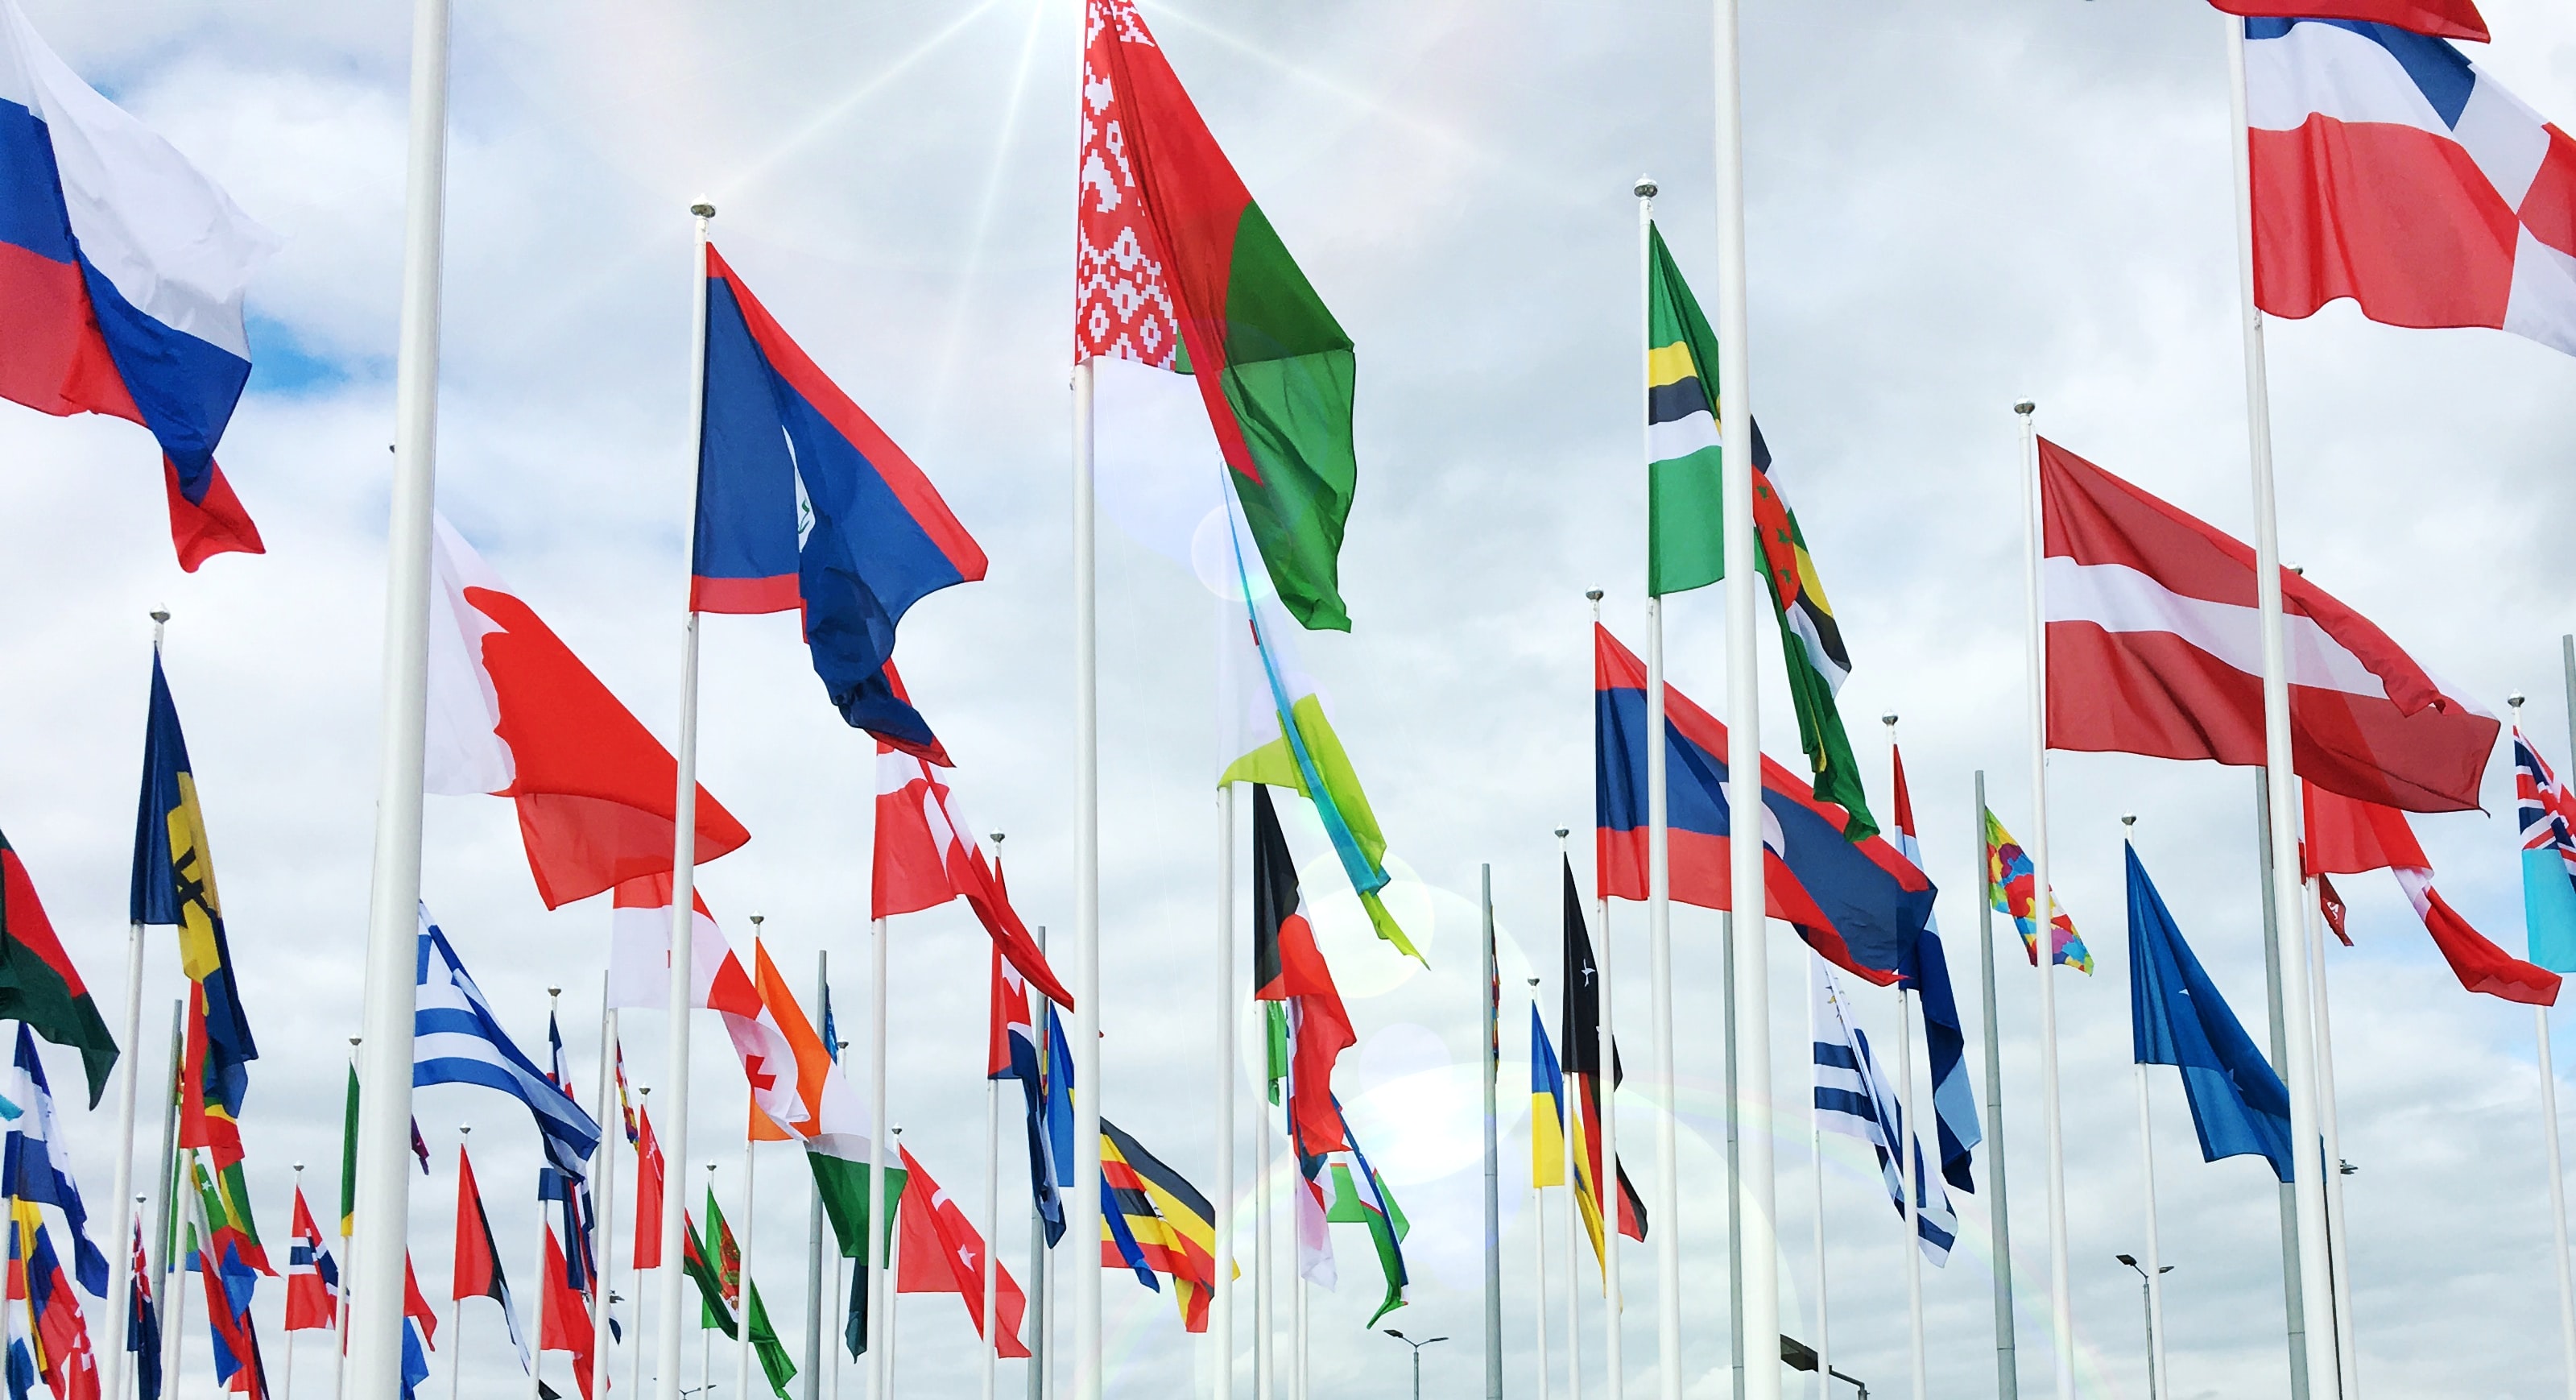 A scene featuring a collection of international flags against a backdrop of the sky